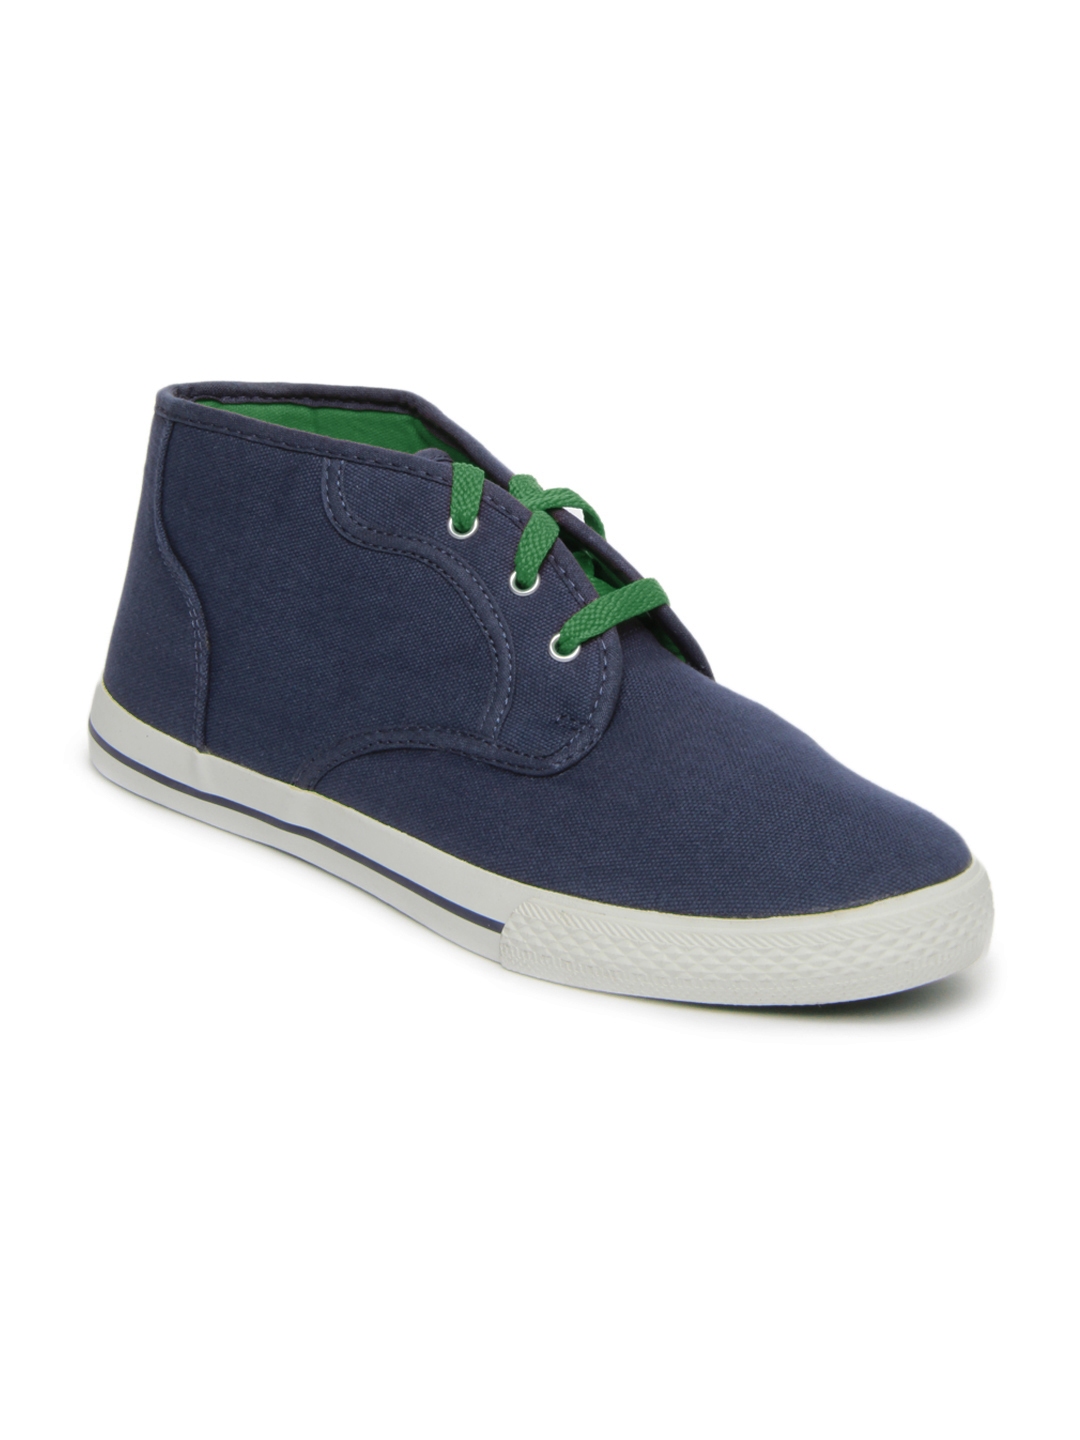 Buy Roadster Men Navy Casual Shoes - Casual Shoes for Men 366263 | Myntra